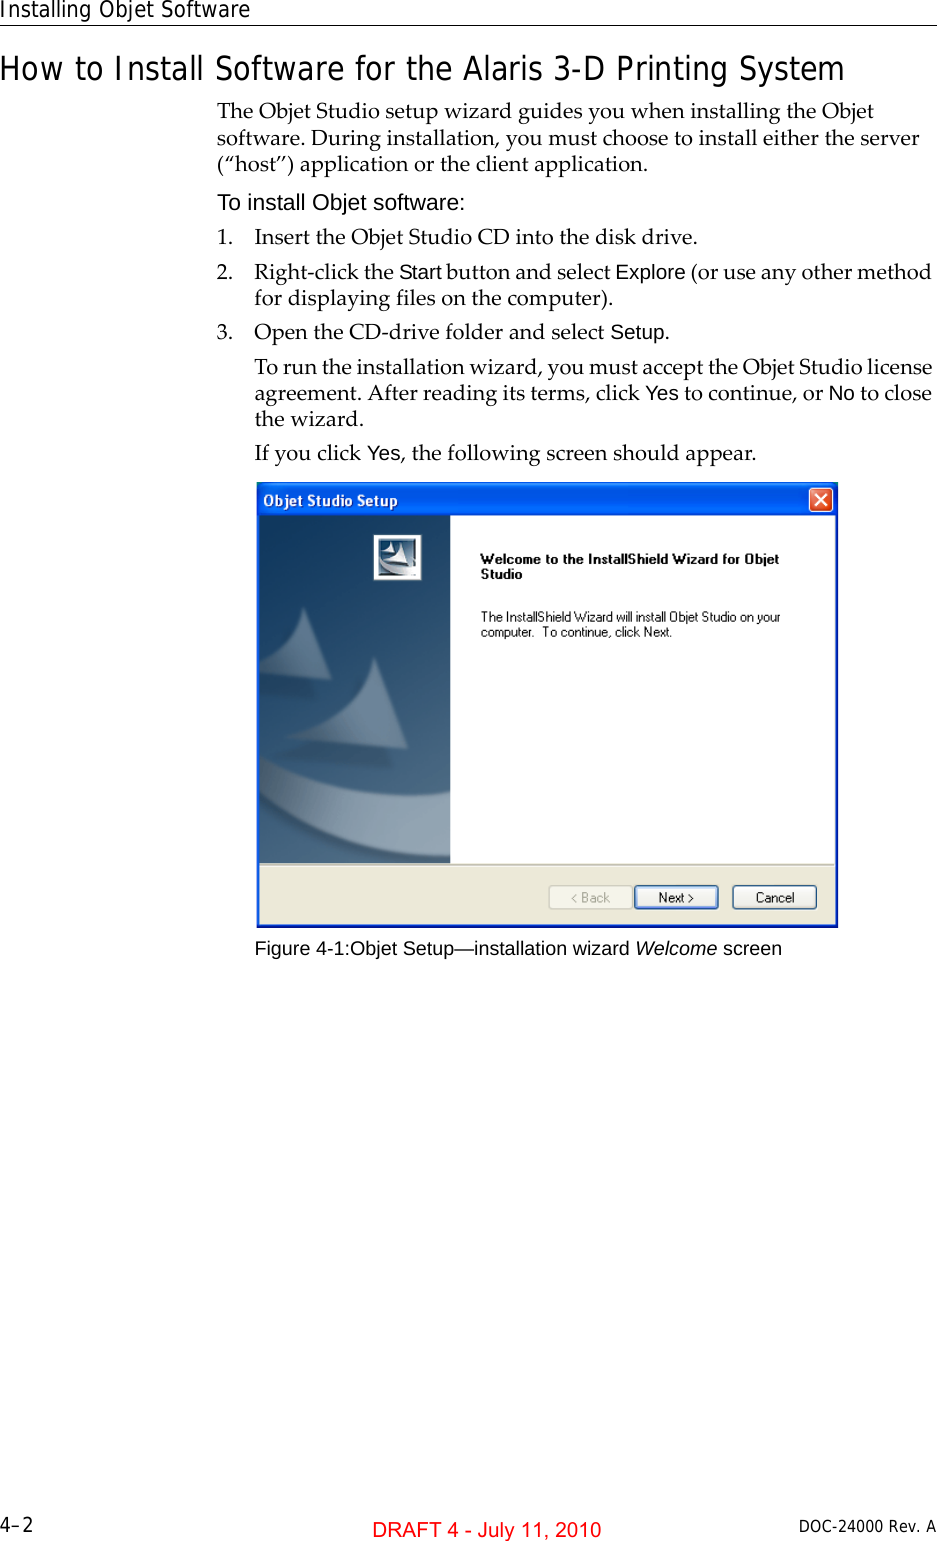 Installing Objet Software4–2 DOC-24000 Rev. AHow to Install Software for the Alaris 3-D Printing SystemTheObjetStudiosetupwizardguidesyouwheninstallingtheObjetsoftware.Duringinstallation,youmustchoosetoinstalleithertheserver(“host”)applicationortheclientapplication.To install Objet software:1. InserttheObjetStudioCDintothediskdrive.2. Right‐clicktheStartbuttonandselectExplore(oruseanyothermethodfordisplayingfilesonthecomputer).3. OpentheCD‐drivefolderandselectSetup.Toruntheinstallationwizard,youmustaccepttheObjetStudiolicenseagreement.Afterreadingitsterms,clickYestocontinue,orNotoclosethewizard.IfyouclickYes,thefollowingscreenshouldappear.Figure 4-1:Objet Setup—installation wizard Welcome screenDRAFT 4 - July 11, 2010